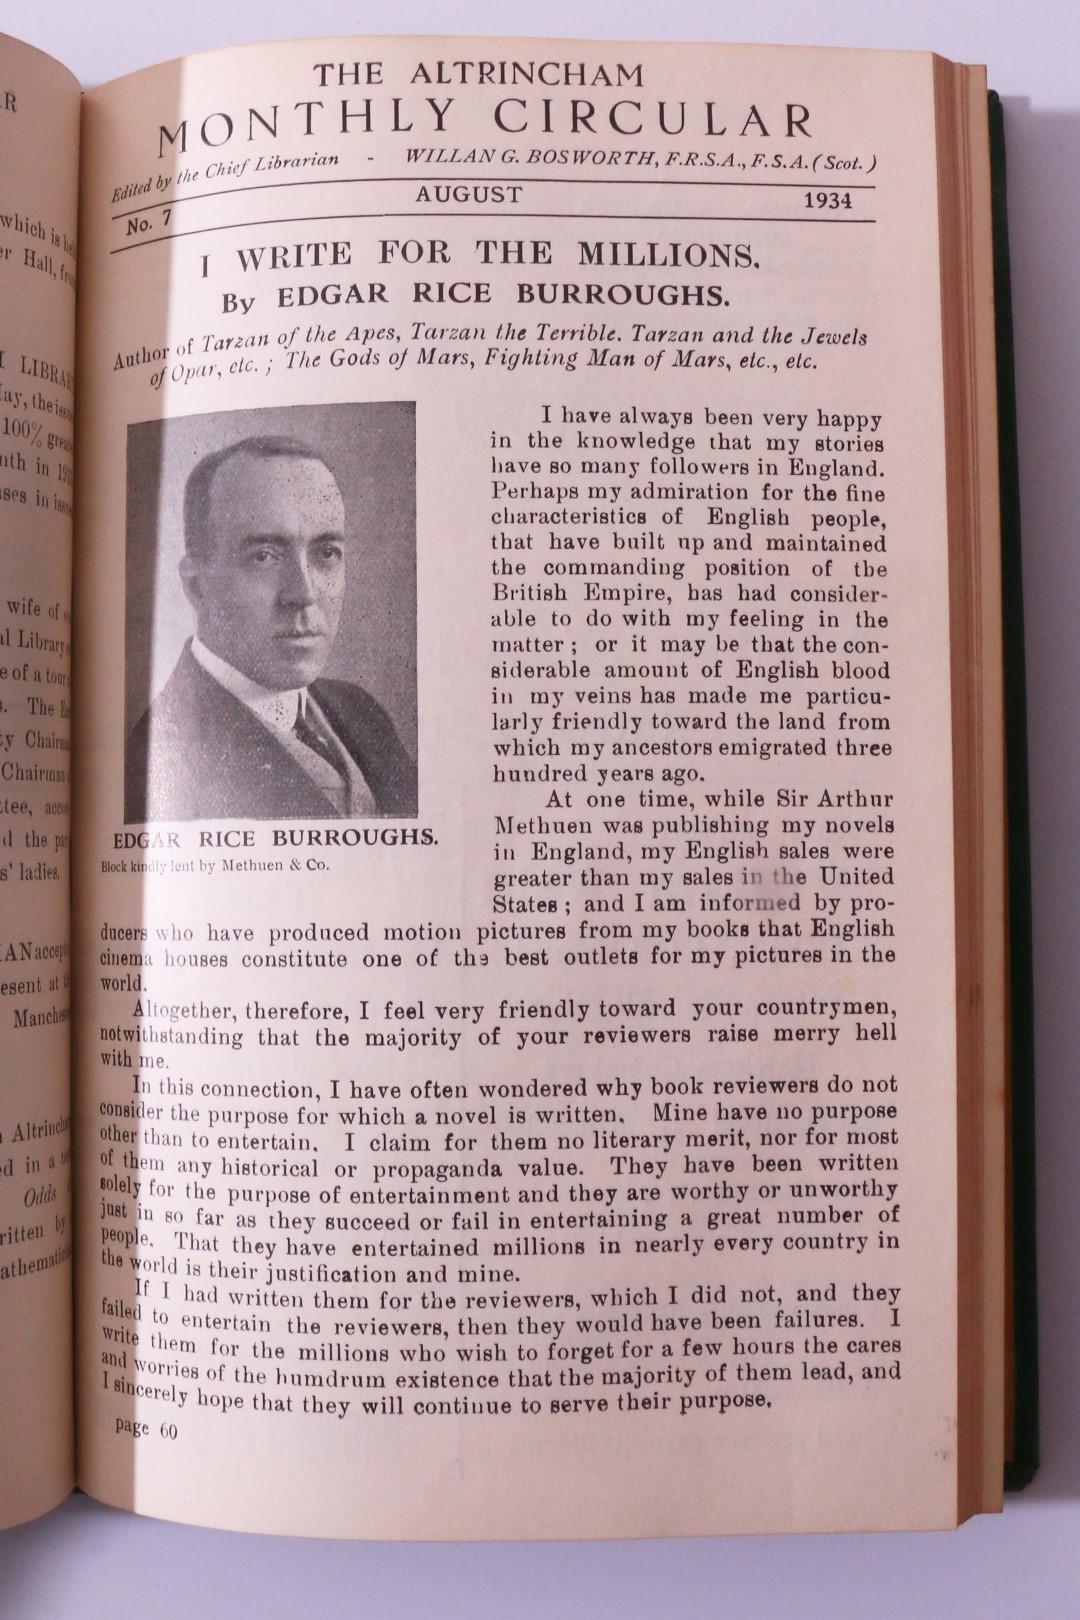 Various [inc. Edgar Rice Burroughs] - The Altrincham Monthly Circular: Volume One - No Publisher, 1934, First Edition.